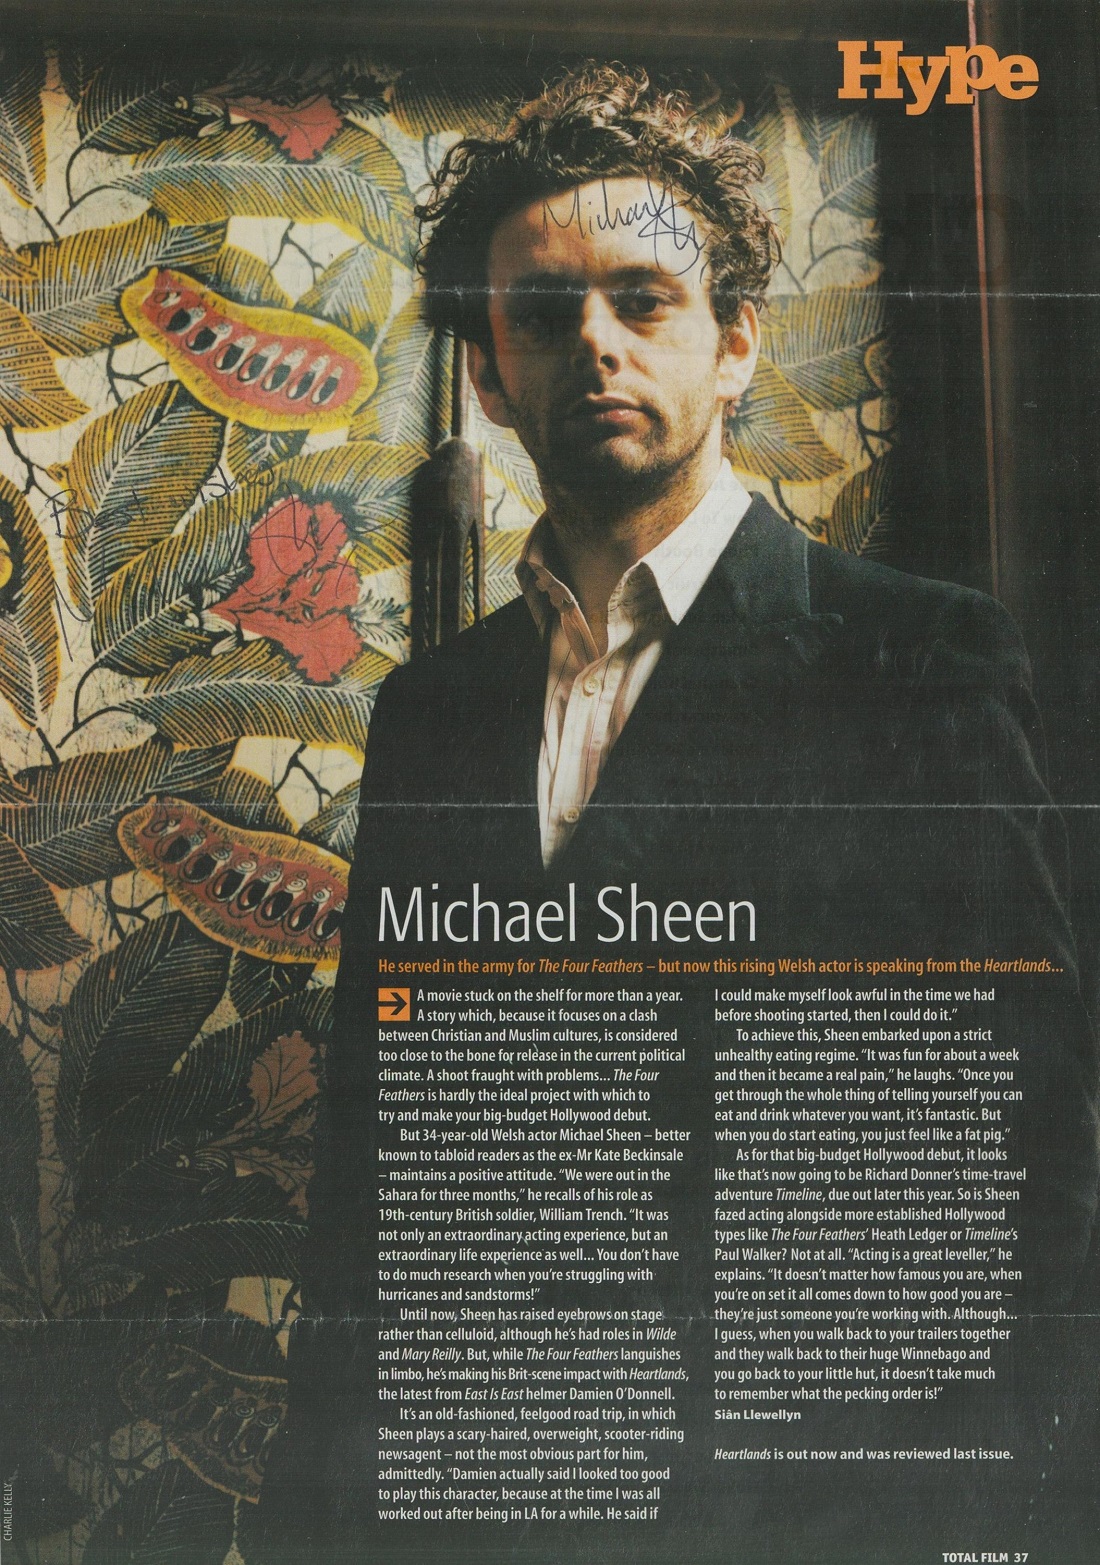 Michael Sheen signed colour magazine cut out article 12x8 inch approx. Good condition. Est